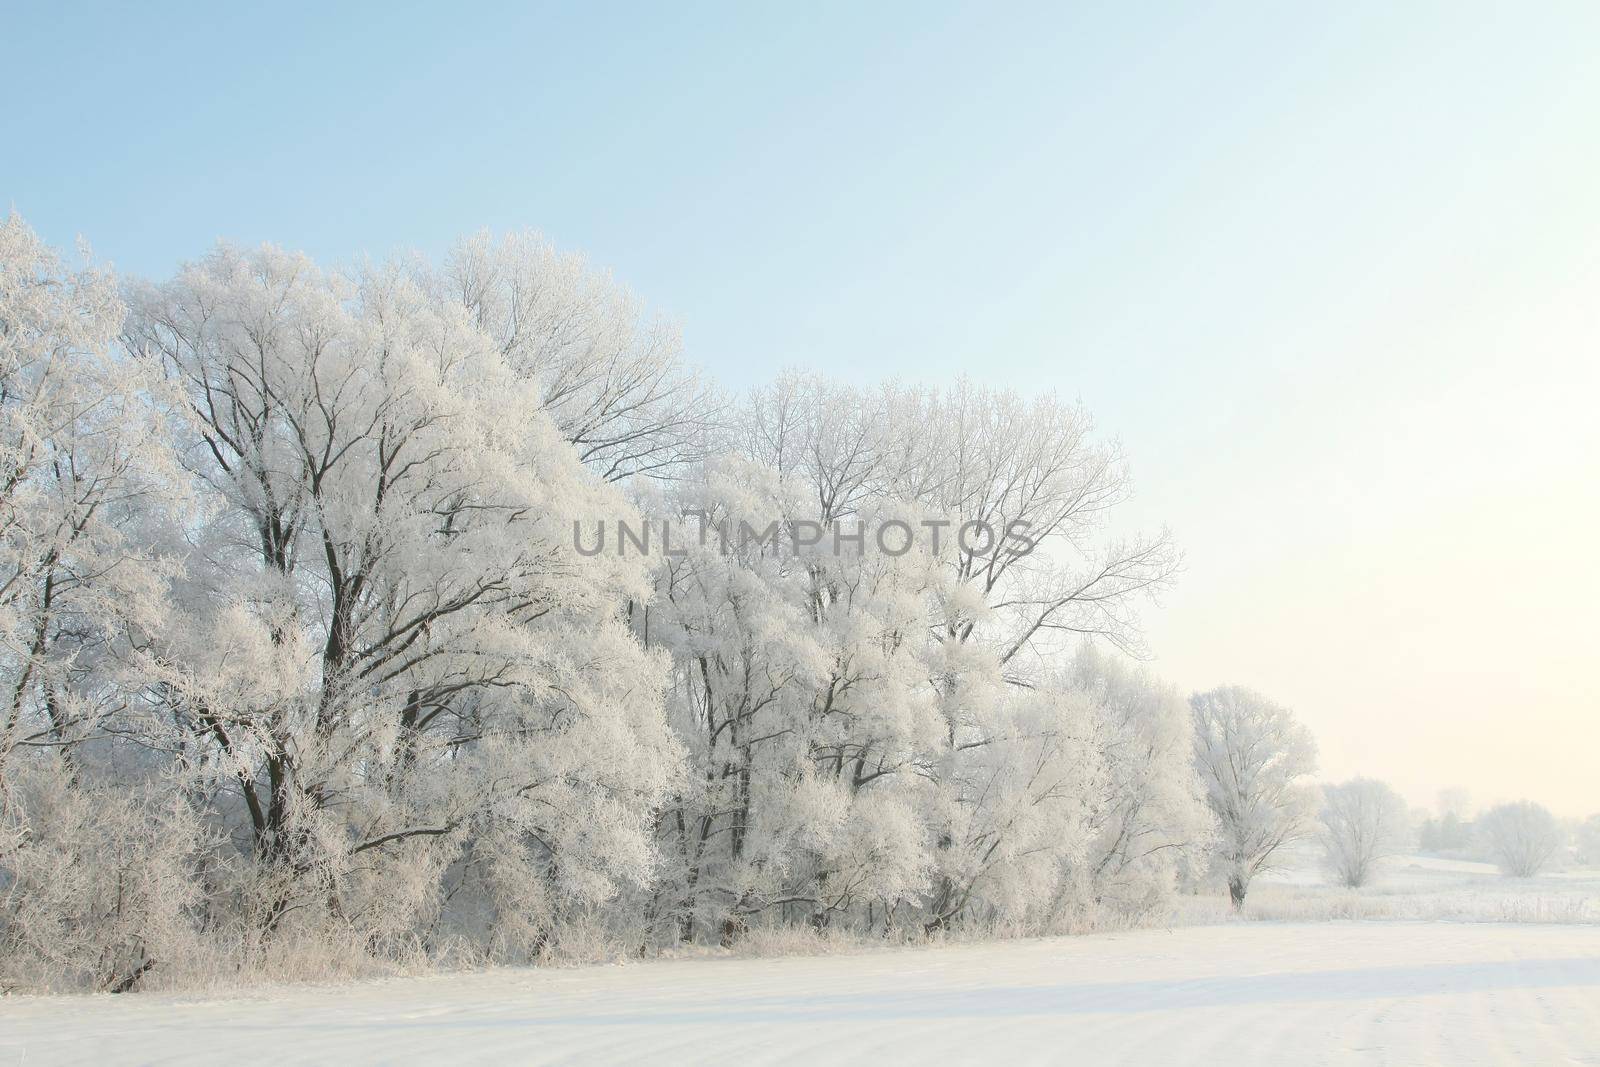 Frosty winter trees against a blue sky at dawn.